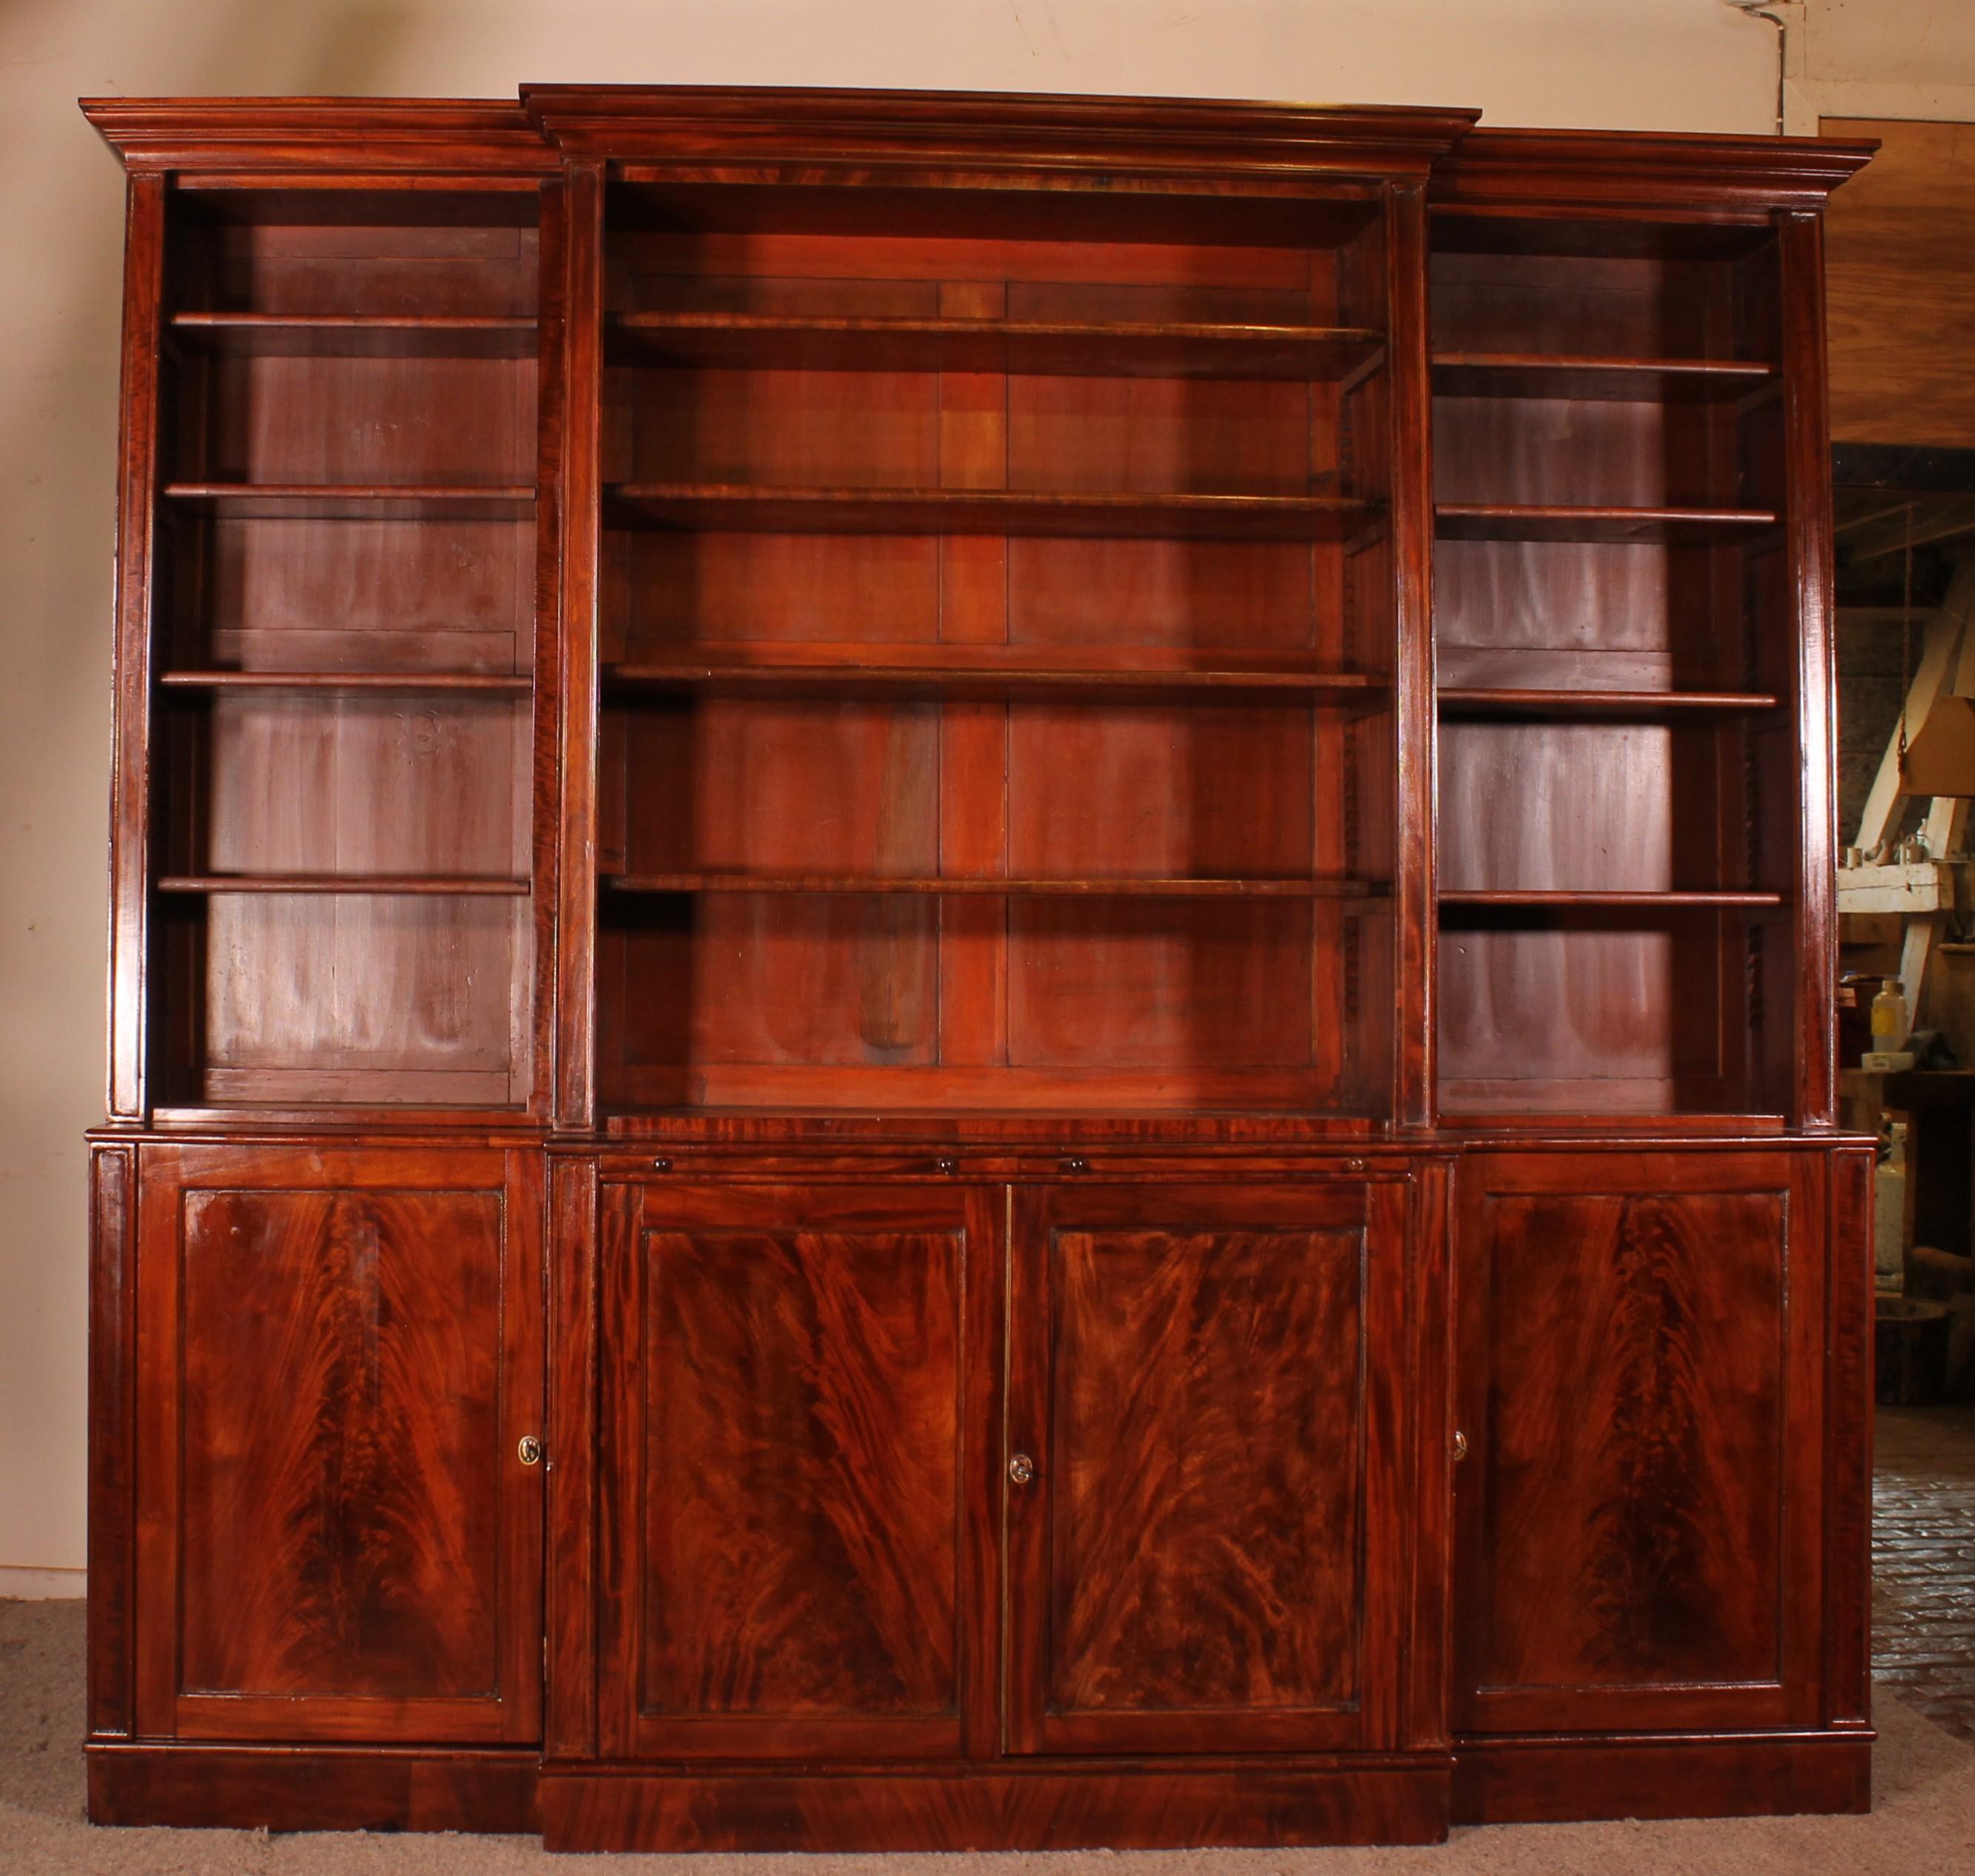 Elegant large open bookcase in mahogany from the 19th century

Very beautiful open bookcase called breakfront which has a central deeper part. Which gives a nice line to the bookcase

The lower part is closed and made up of 4 doors. Very beautiful